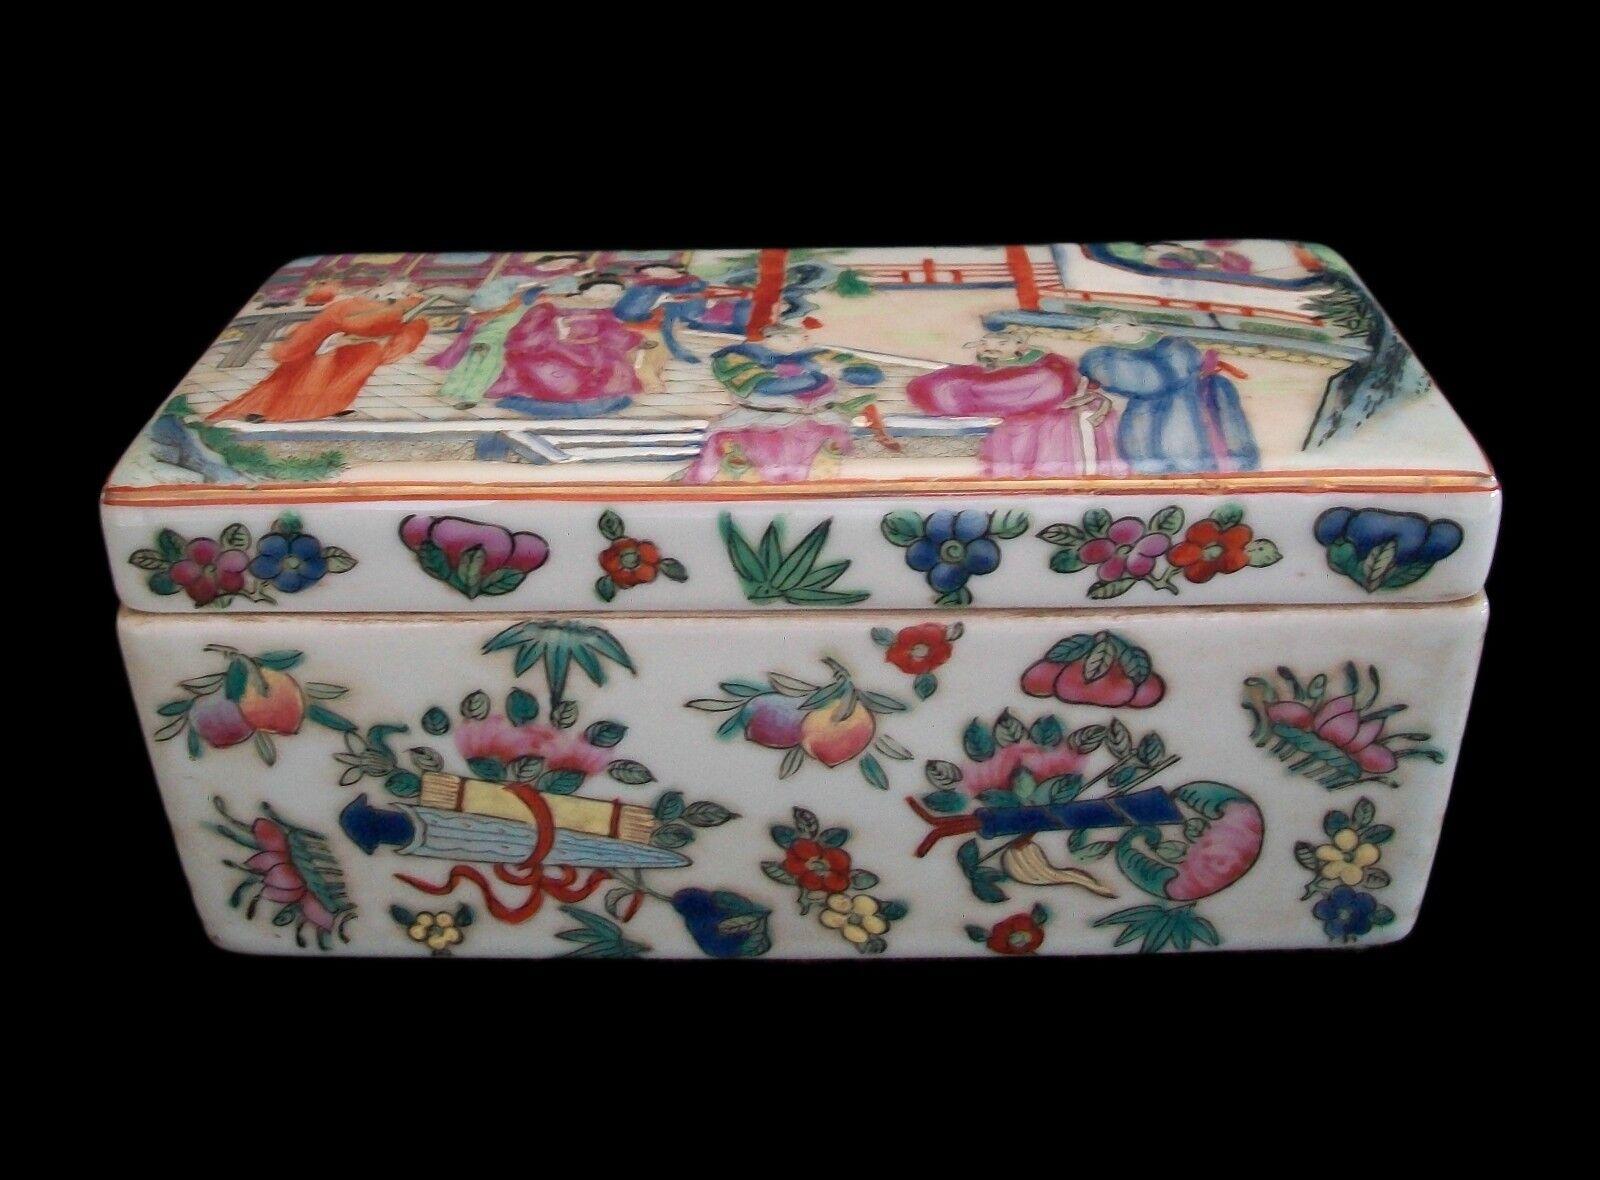 Qing Antique Canton Famille Rose Porcelain Box, Signed, China, Late 19th Century